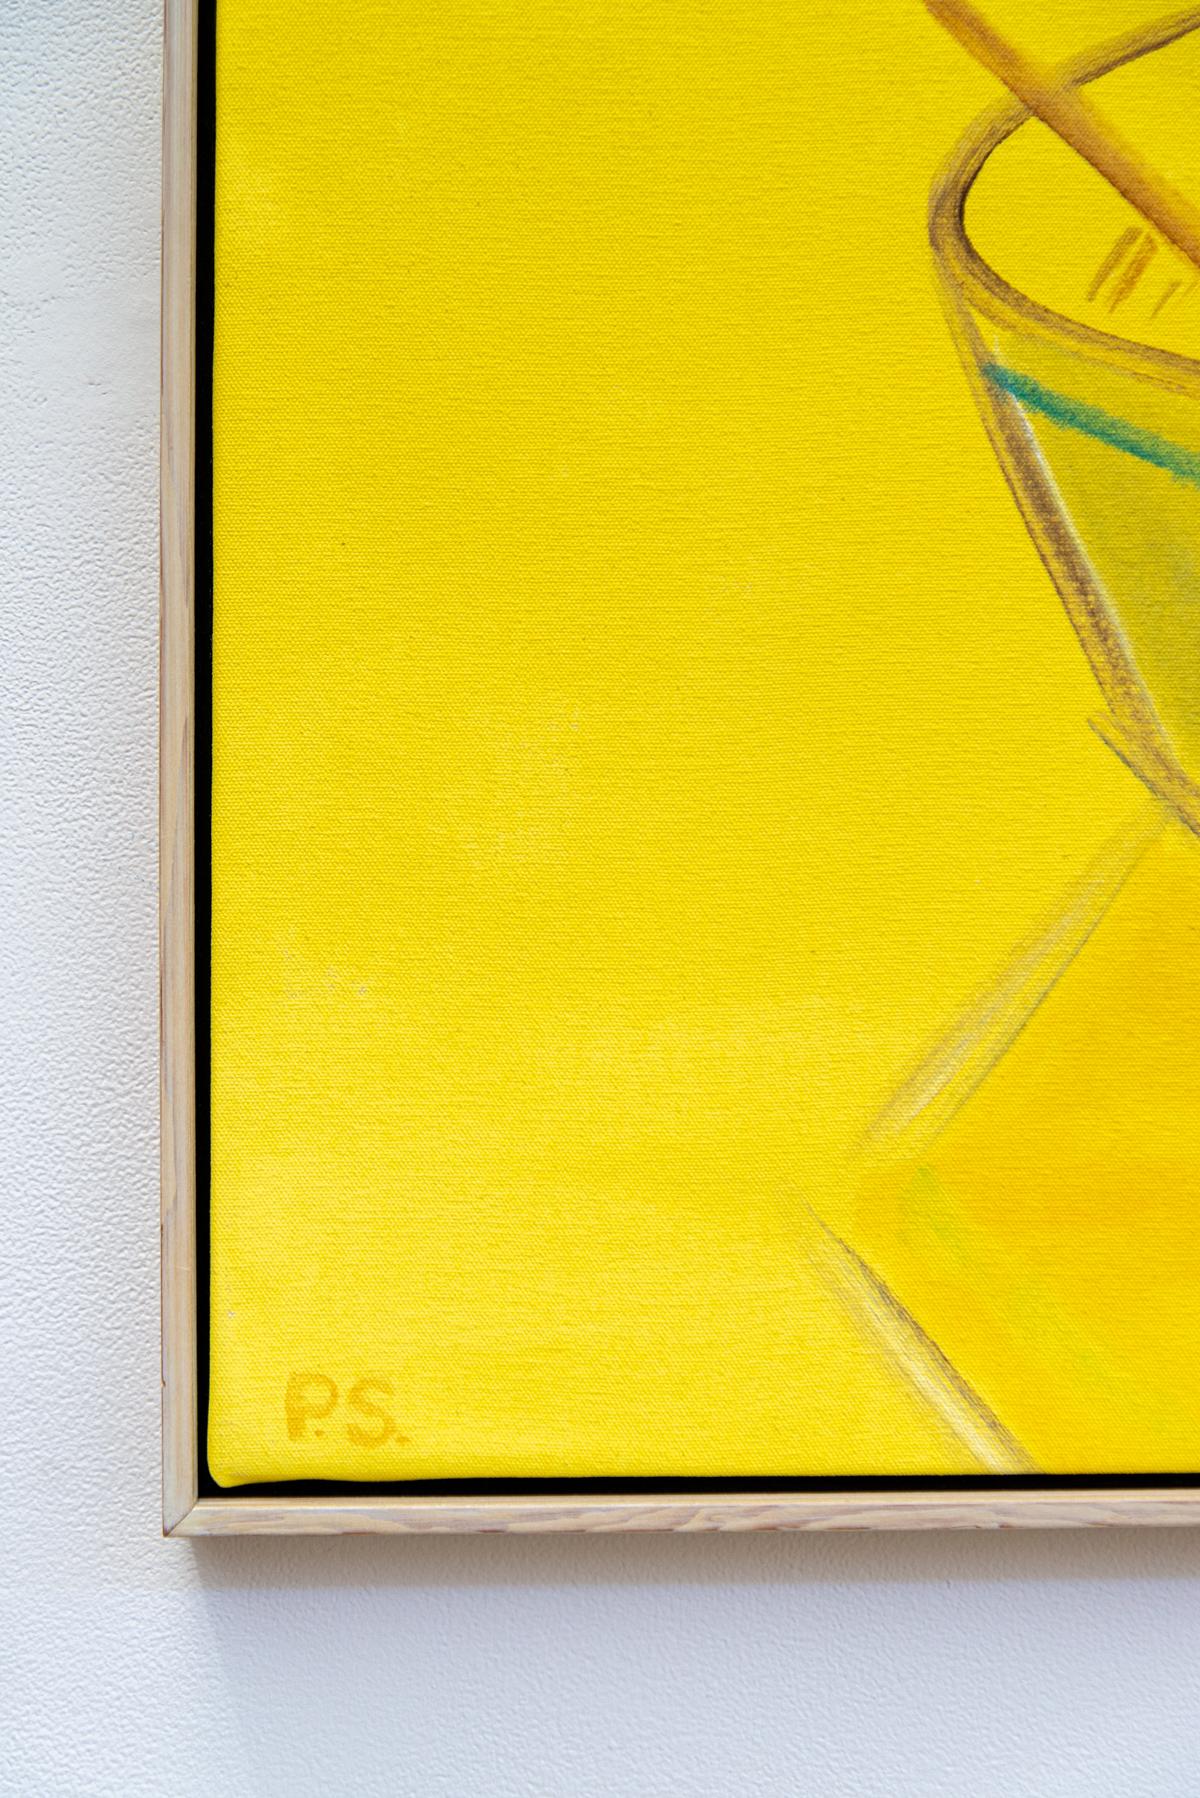 Boat 6 - bright, yellow, minimalist, abstracted waterscape, acrylic on canvas - Yellow Abstract Painting by Pat Service